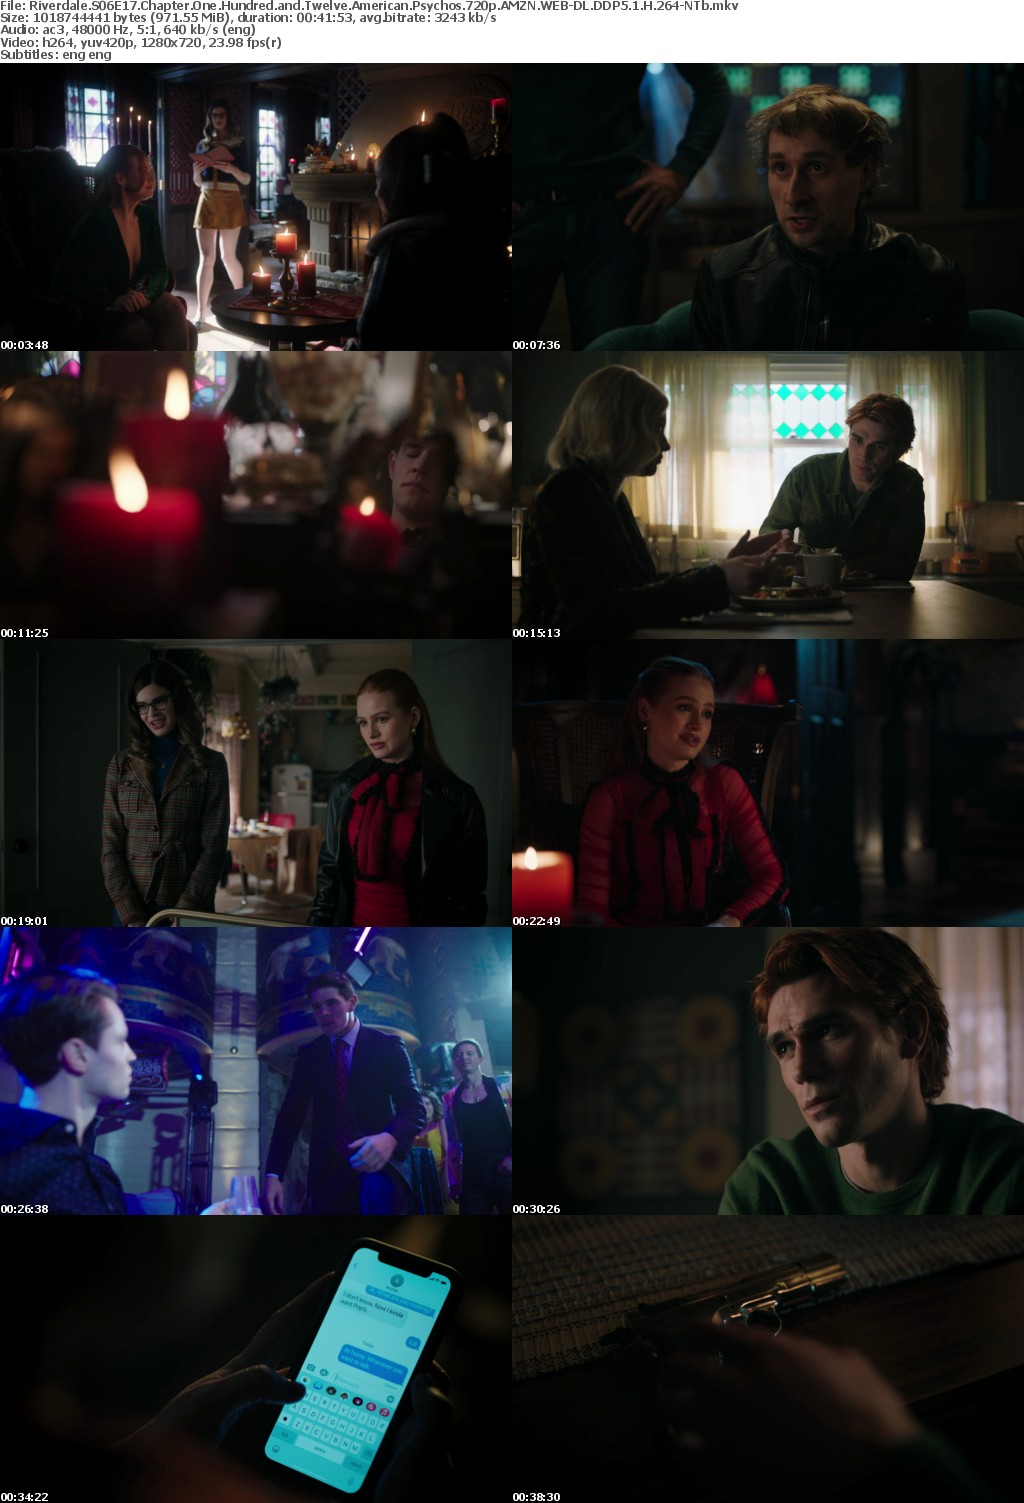 Riverdale US S06E17 Chapter One Hundred and Twelve American Psychos 720p AMZN WEBRip DDP5 1 x264-NTb